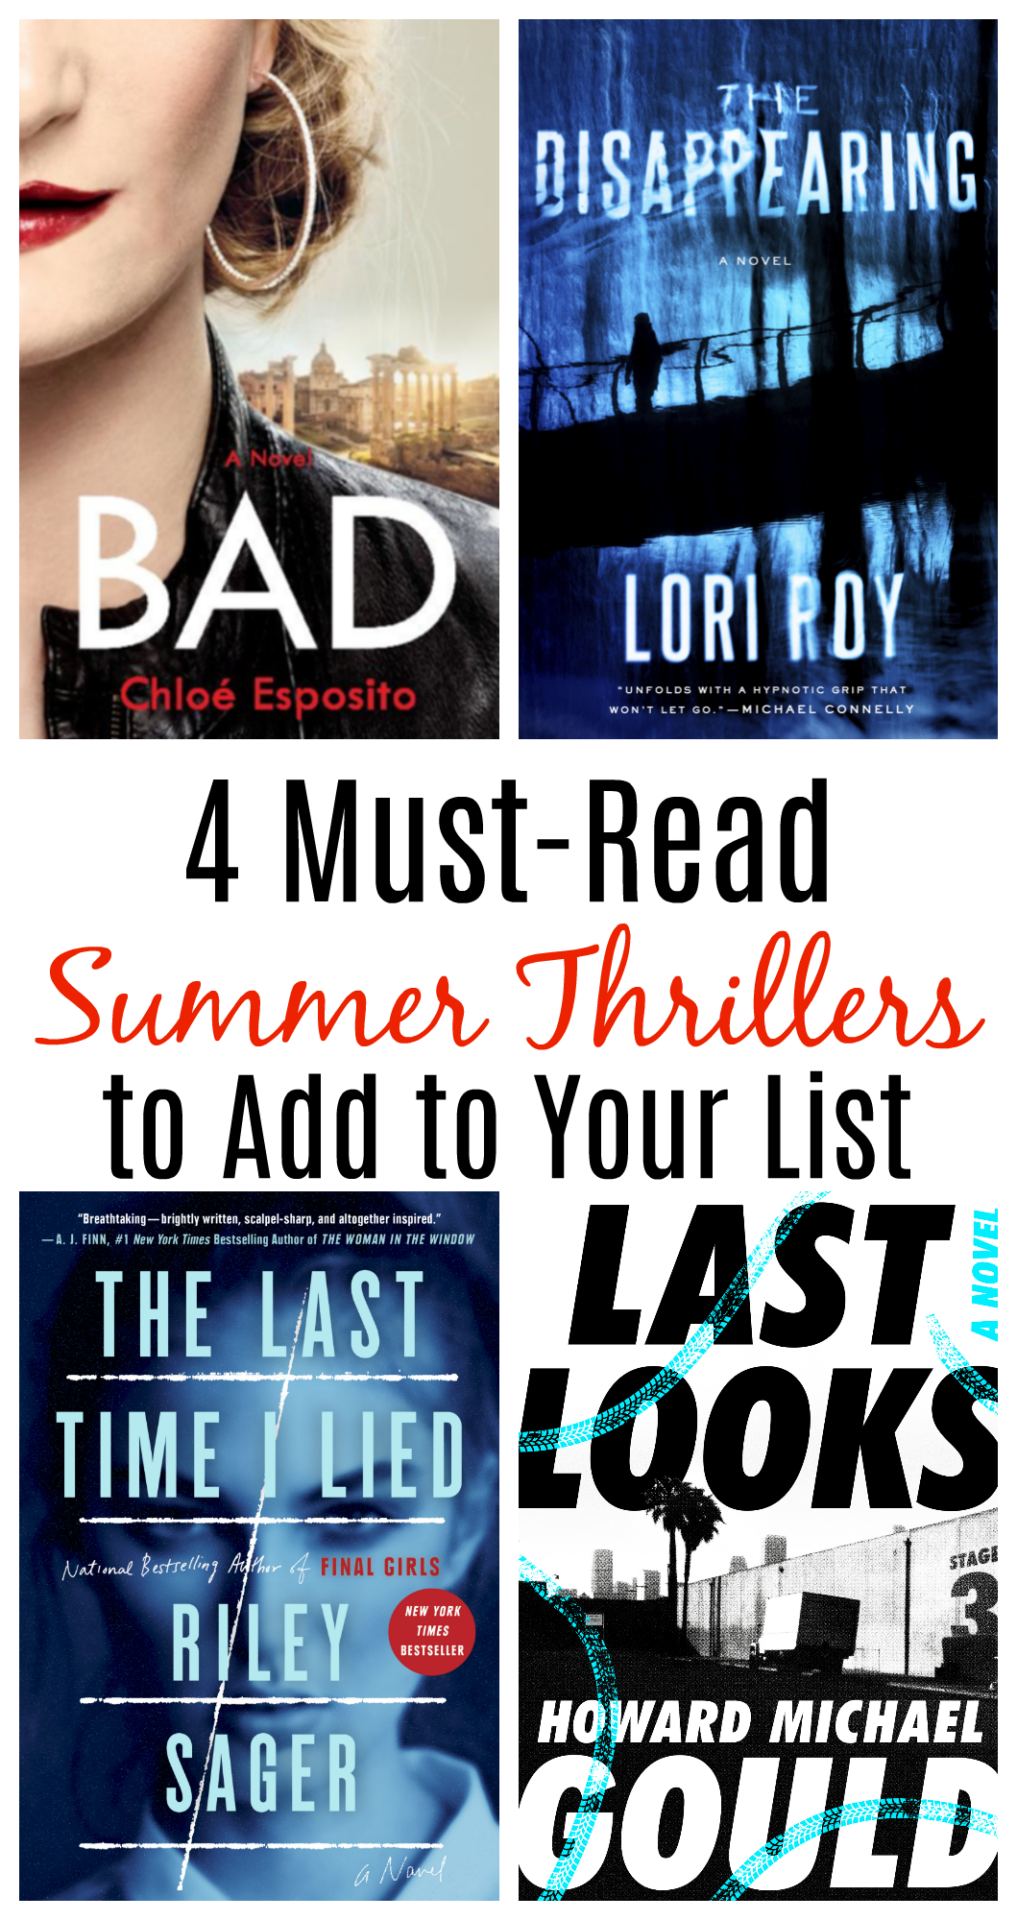 4 MustRead Summer Thrillers to Add to Your List Outnumbered 3 to 1